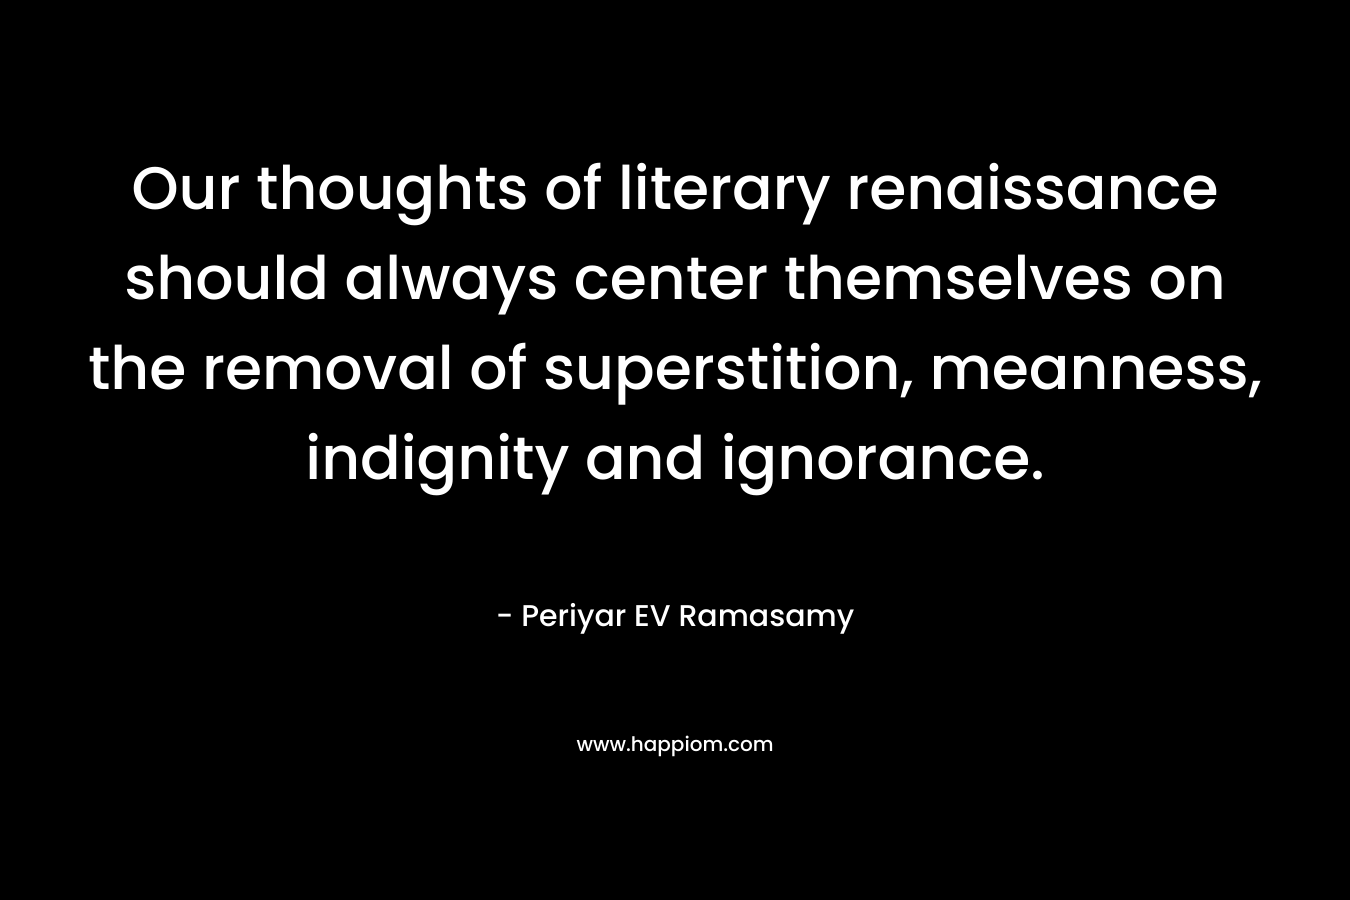 Our thoughts of literary renaissance should always center themselves on the removal of superstition, meanness, indignity and ignorance.